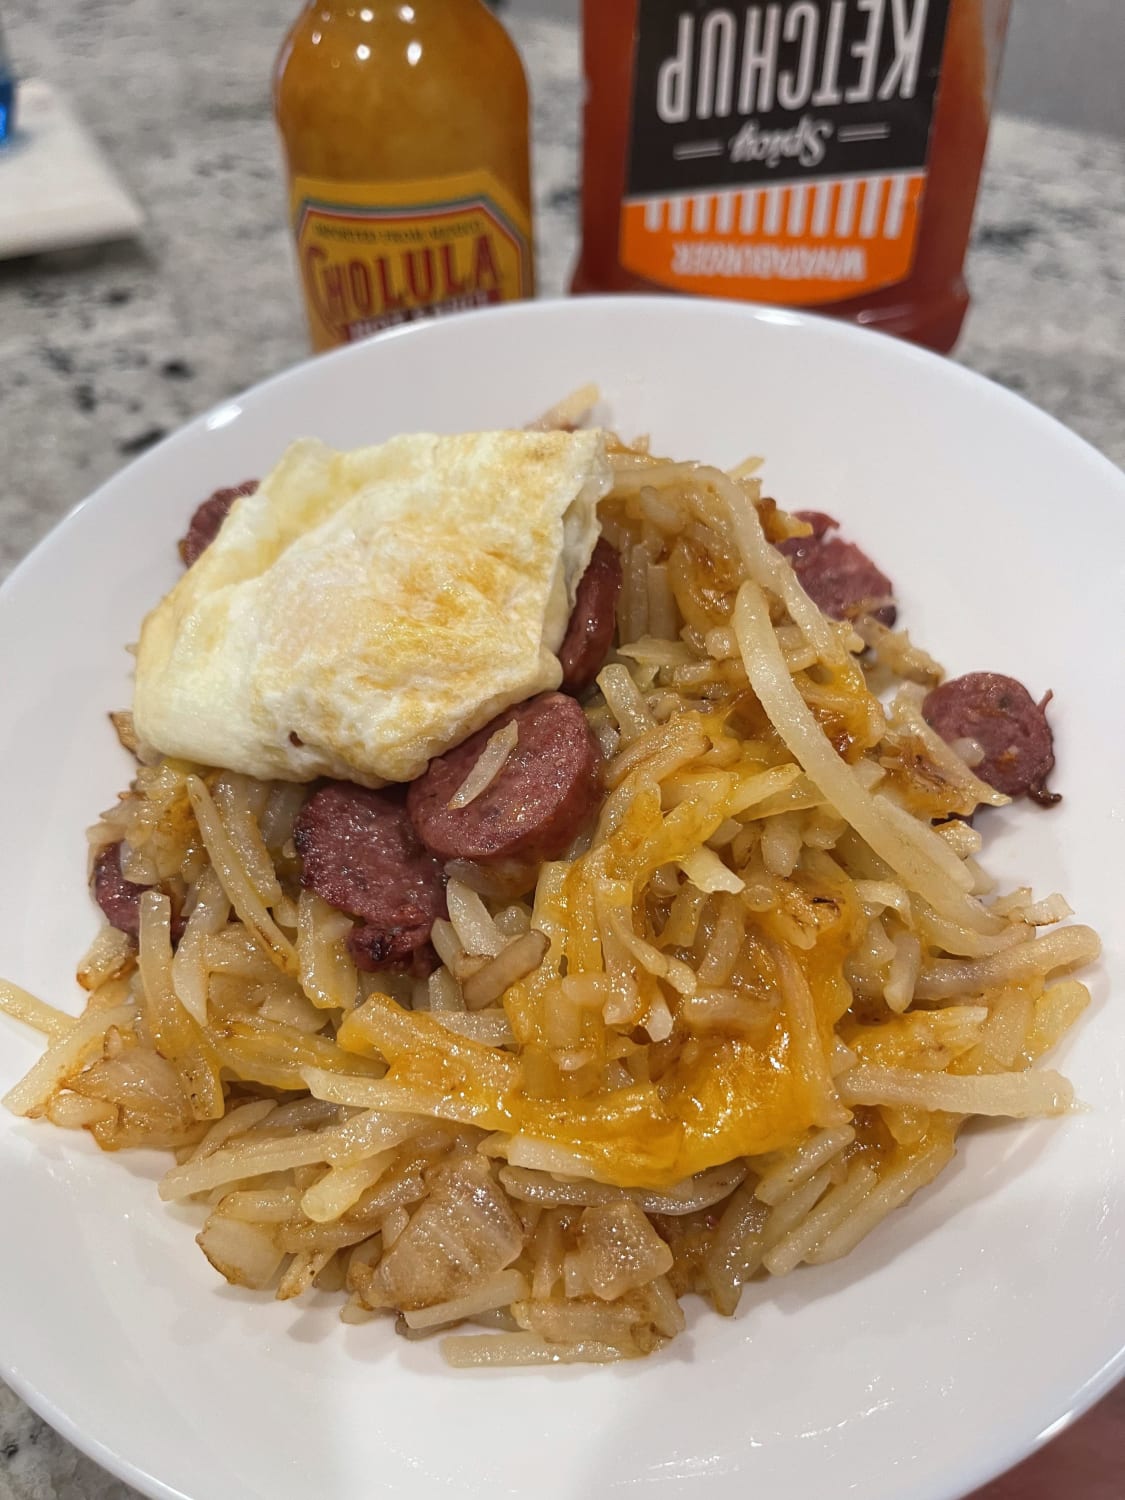 [homemade] Hashbrowns inspired by Waffle House